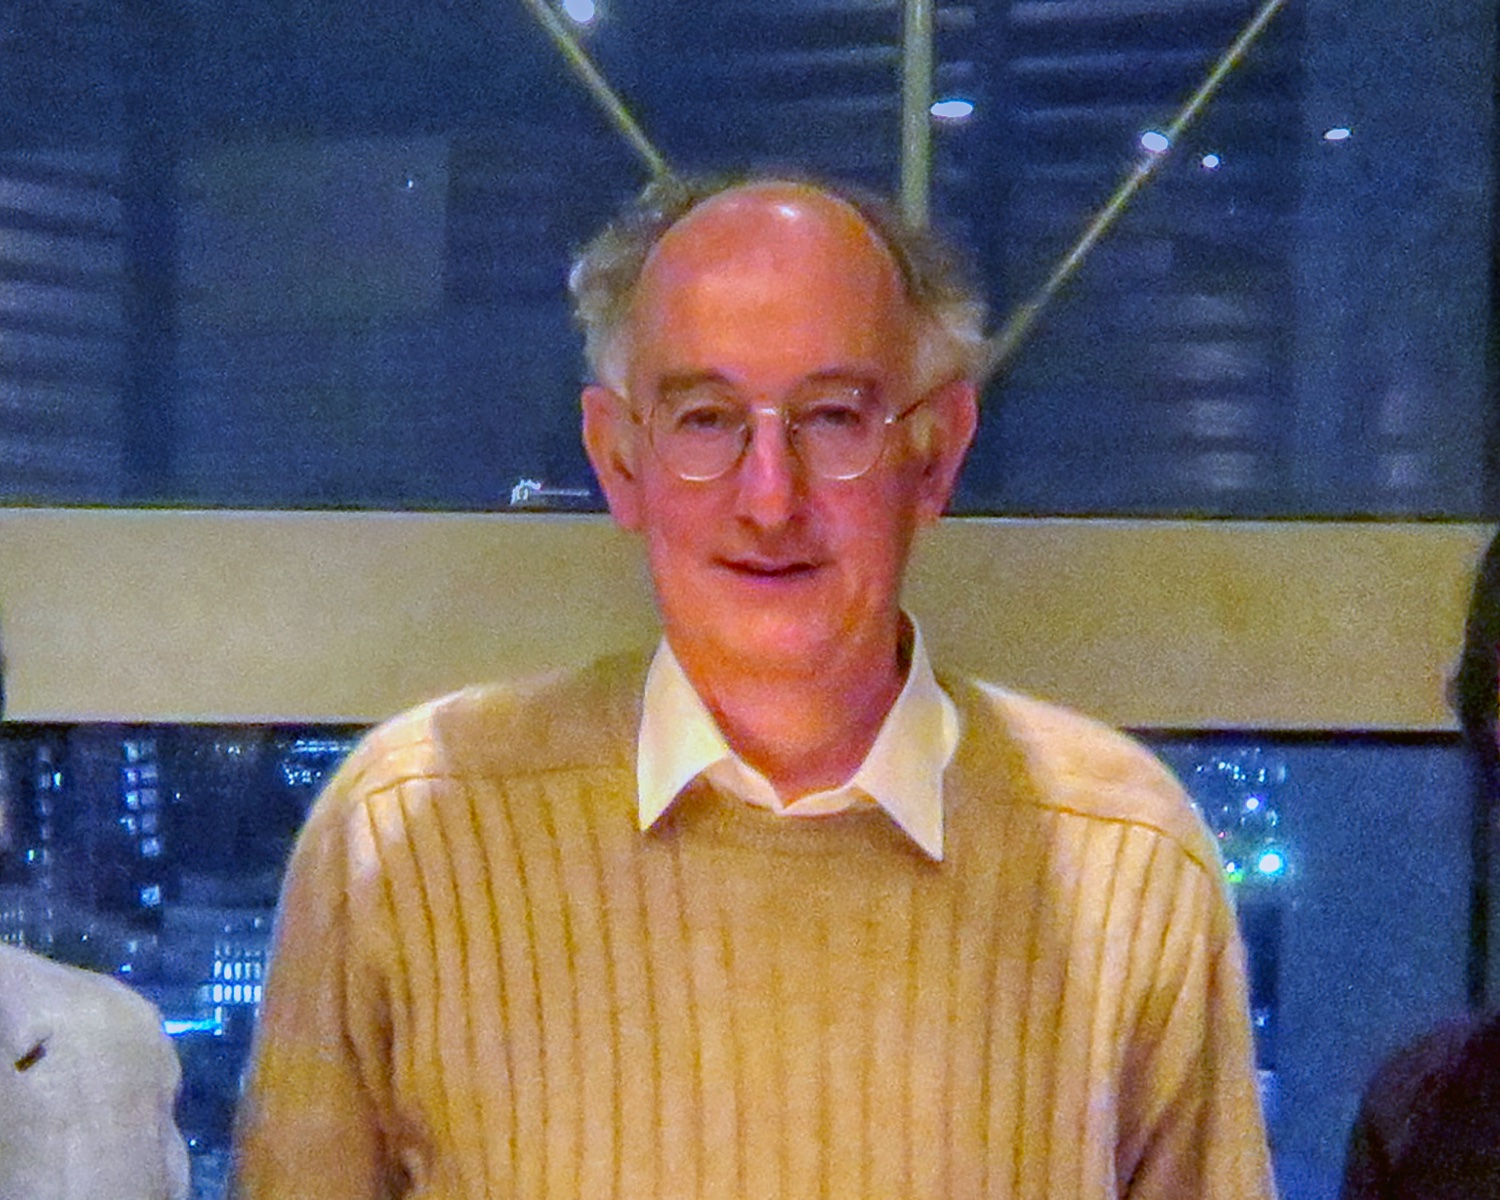 Dominic Lieven, Historian and Honorary Fellow, Trinity College